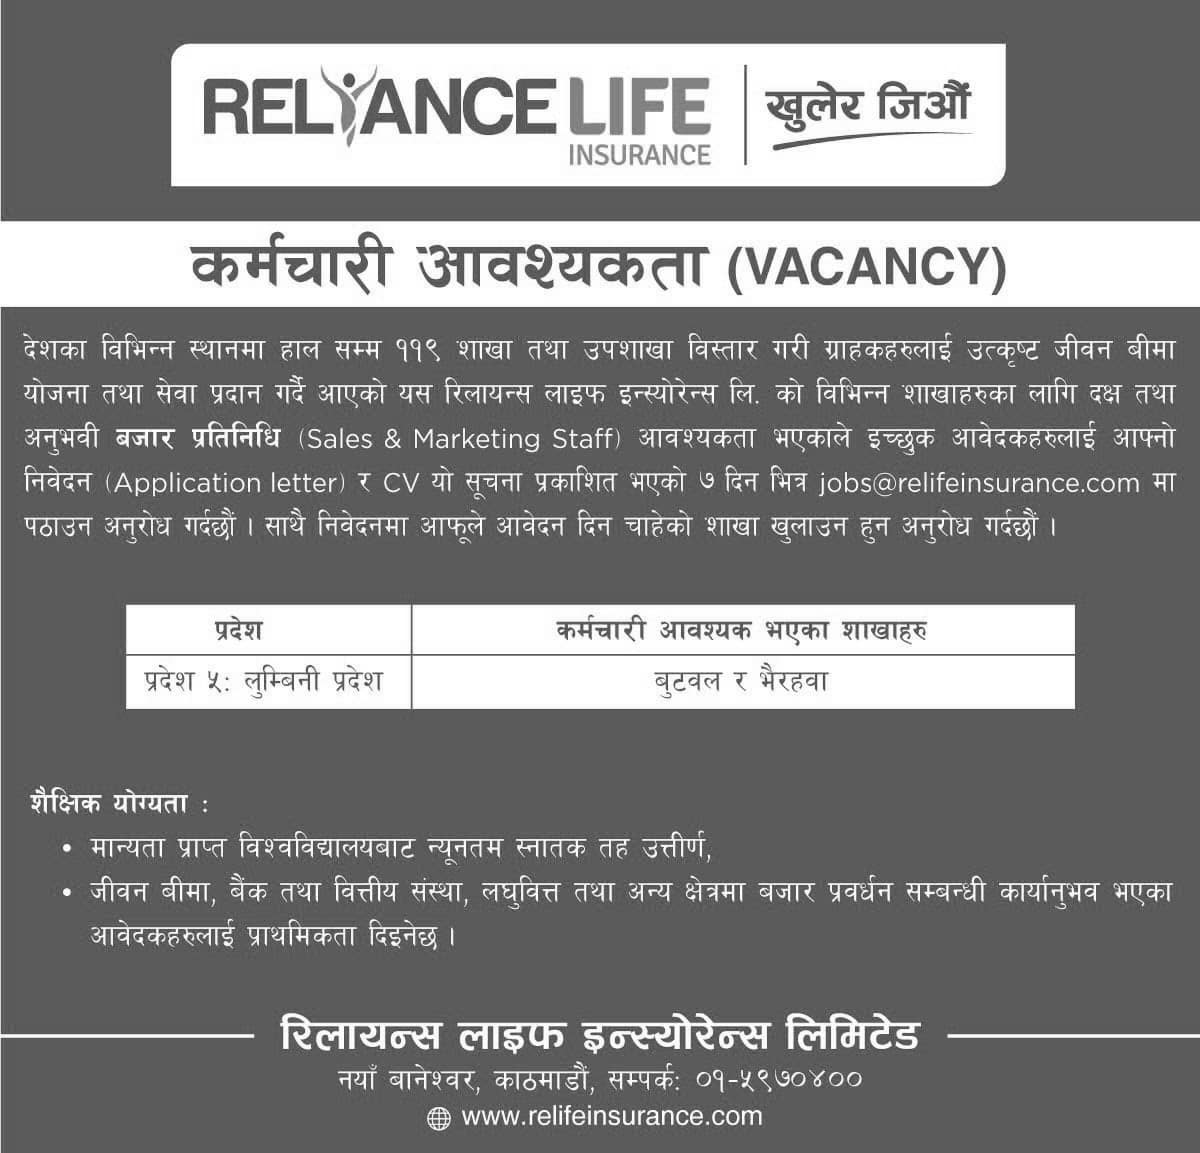 Reliance Life Insurance Vacancy for Sales and Marketing Staff in Lumbini Province